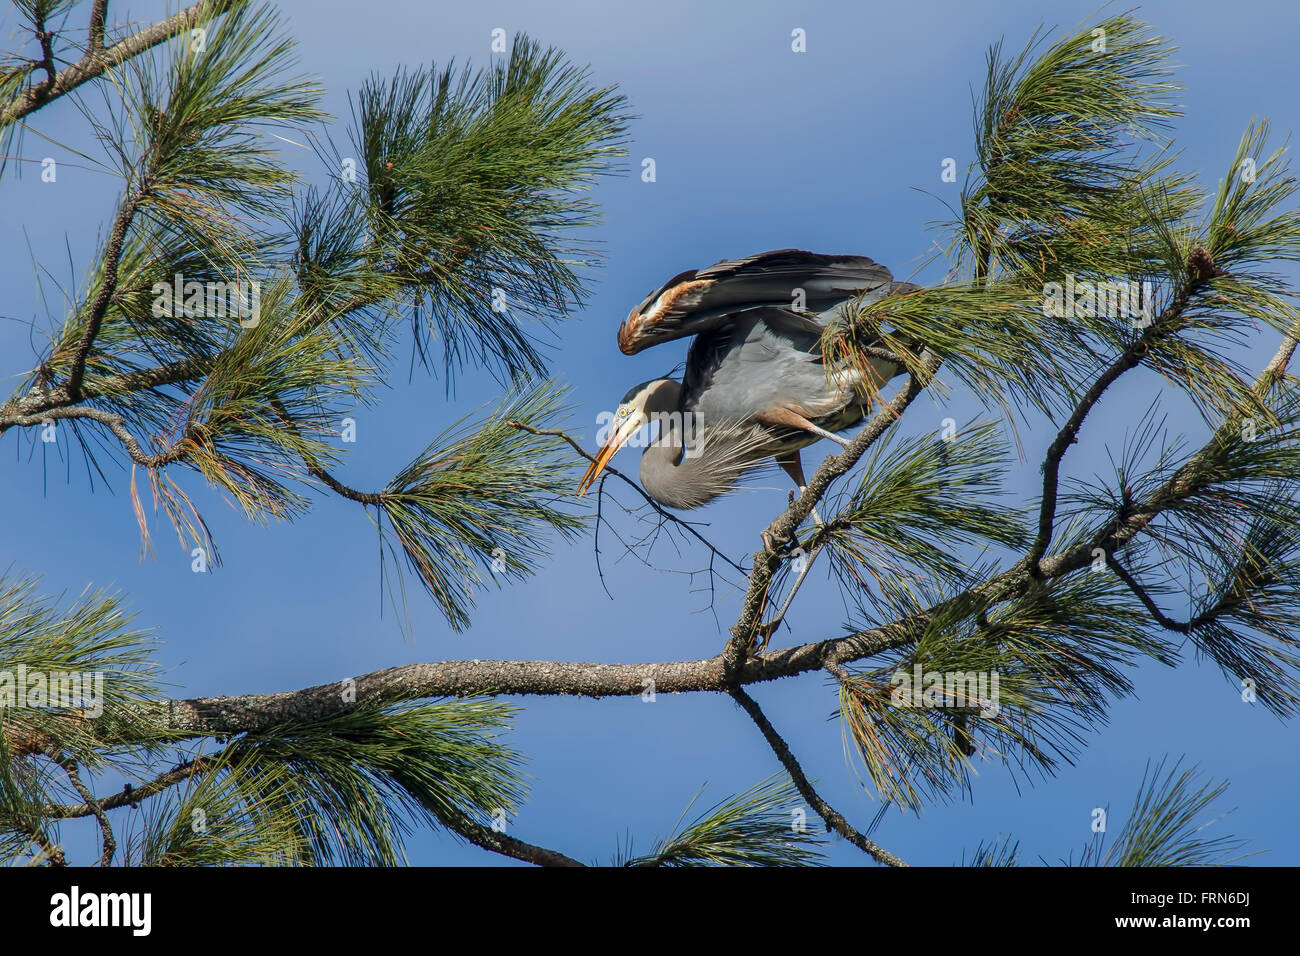 Heron perched on branch with stick. Stock Photo